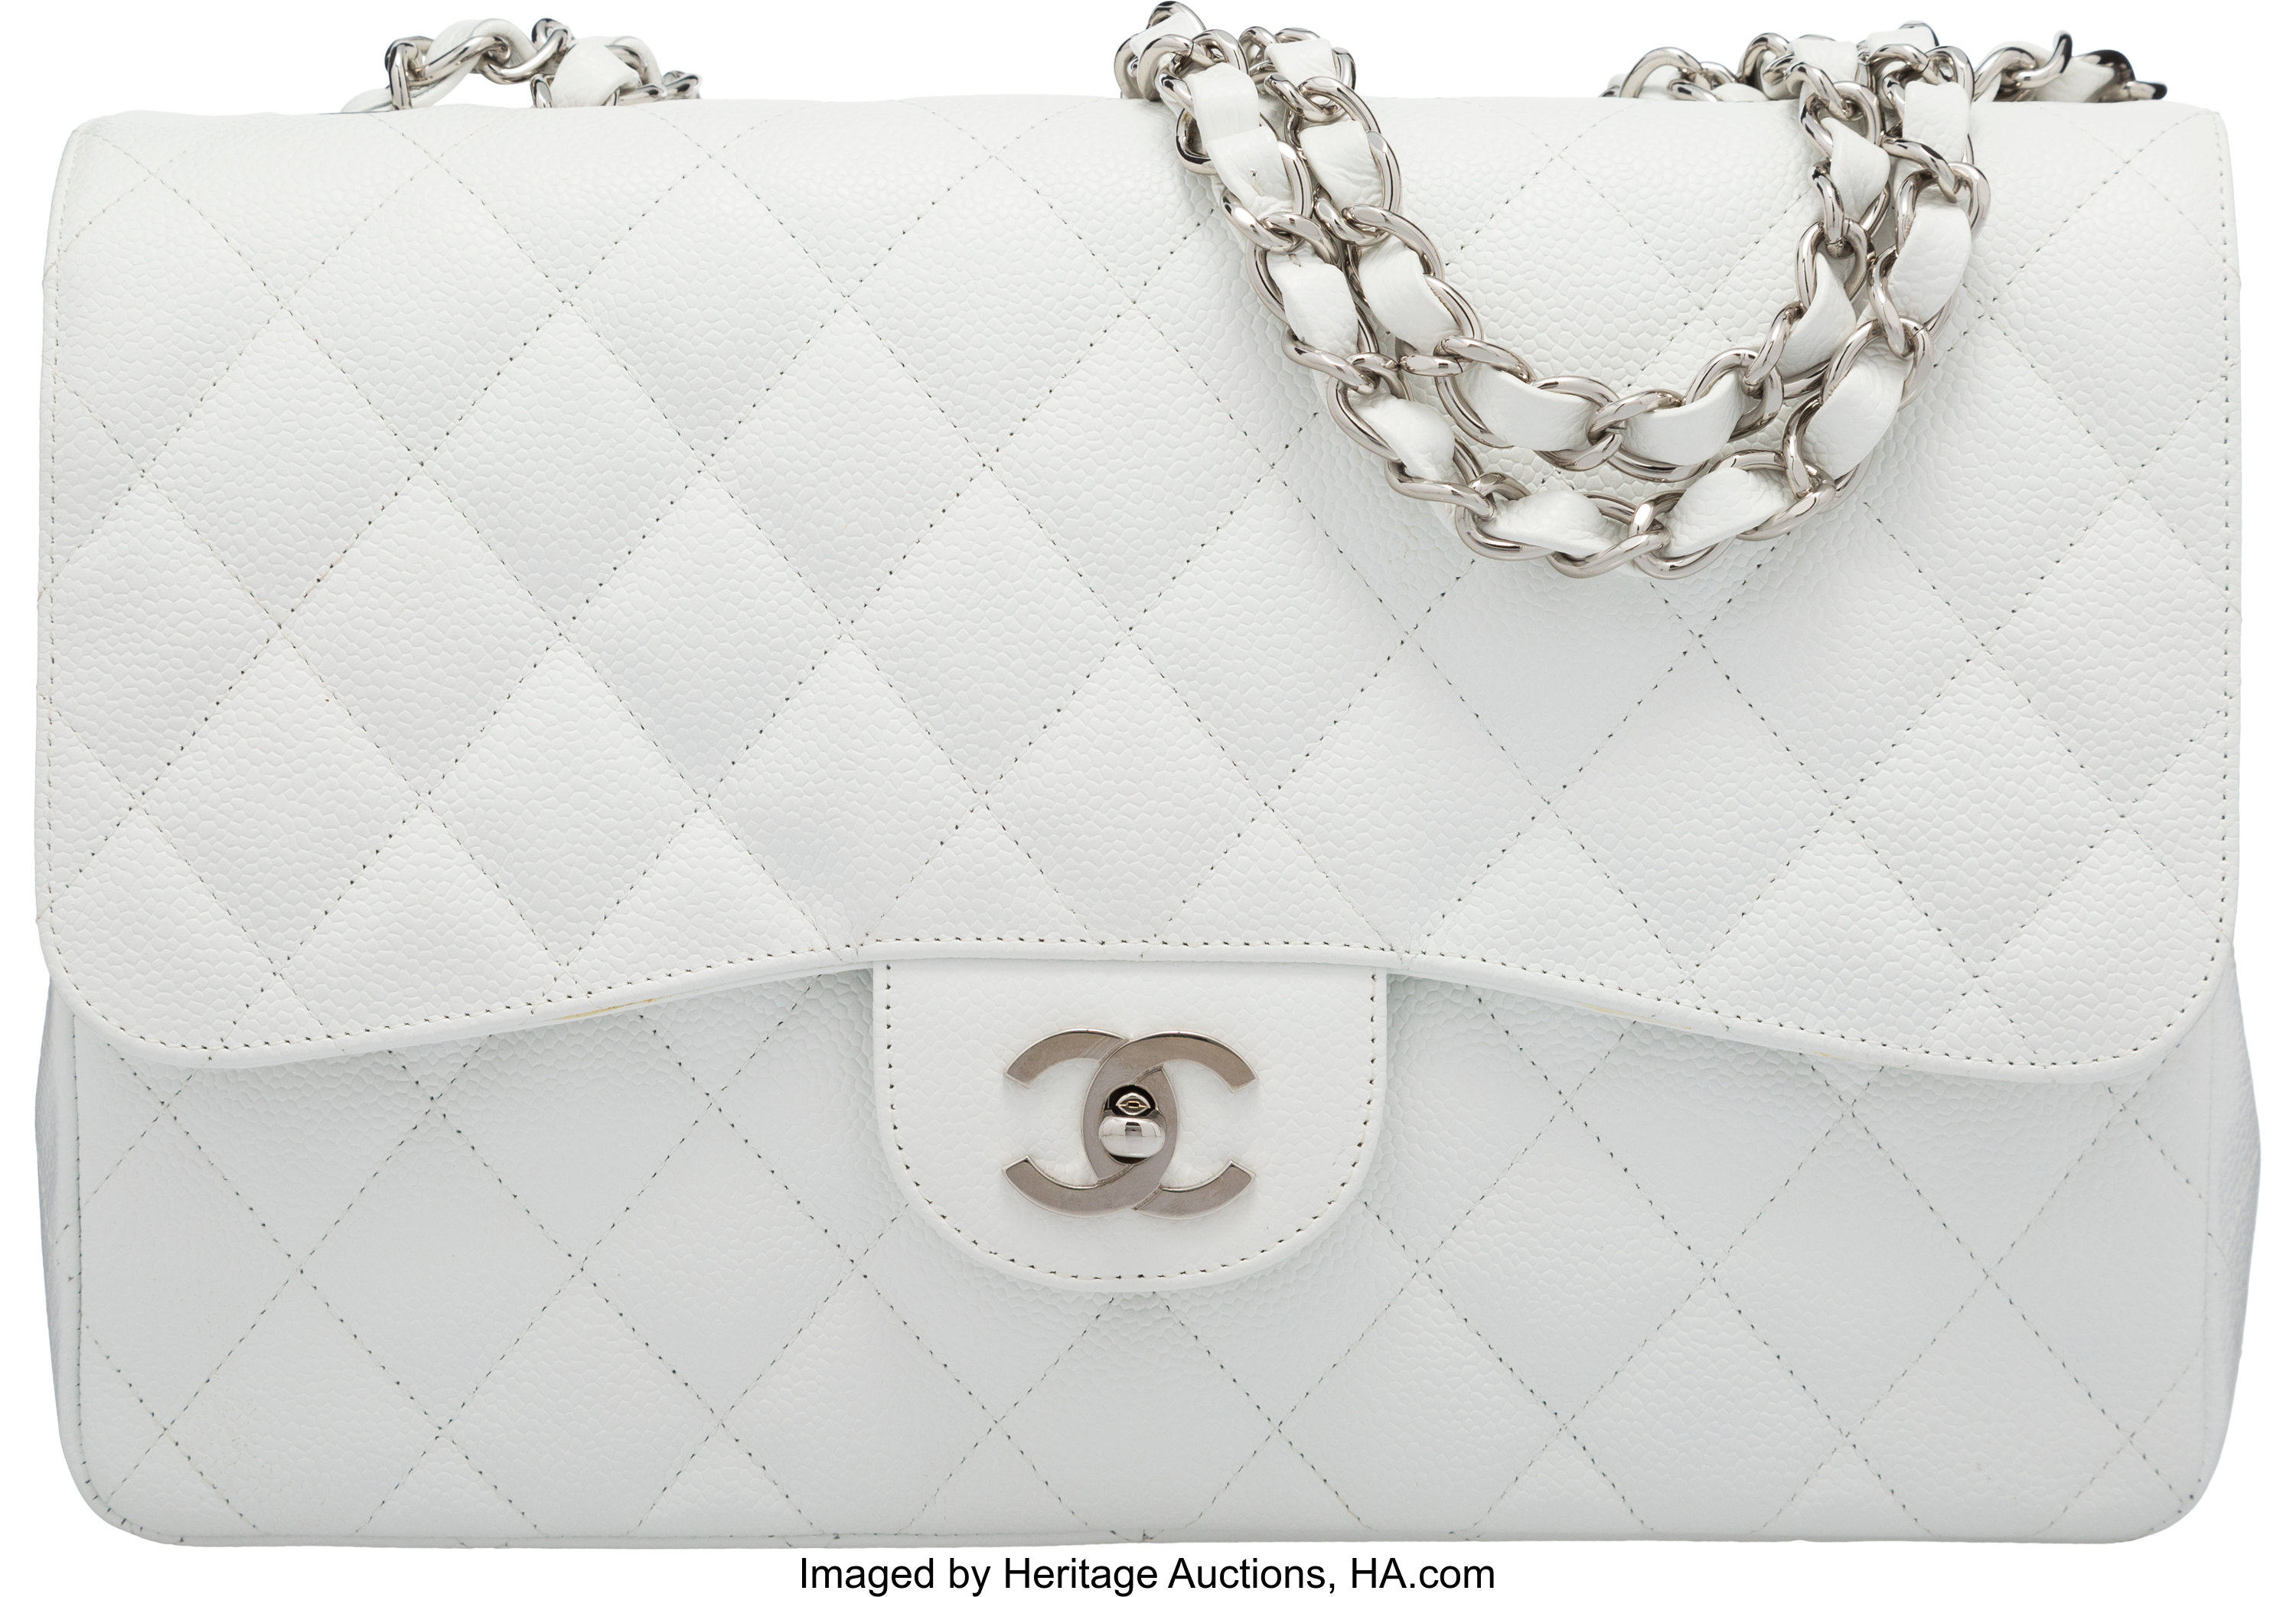 Chanel White Quilted Caviar Leather Flap Bag with Silver Hardware